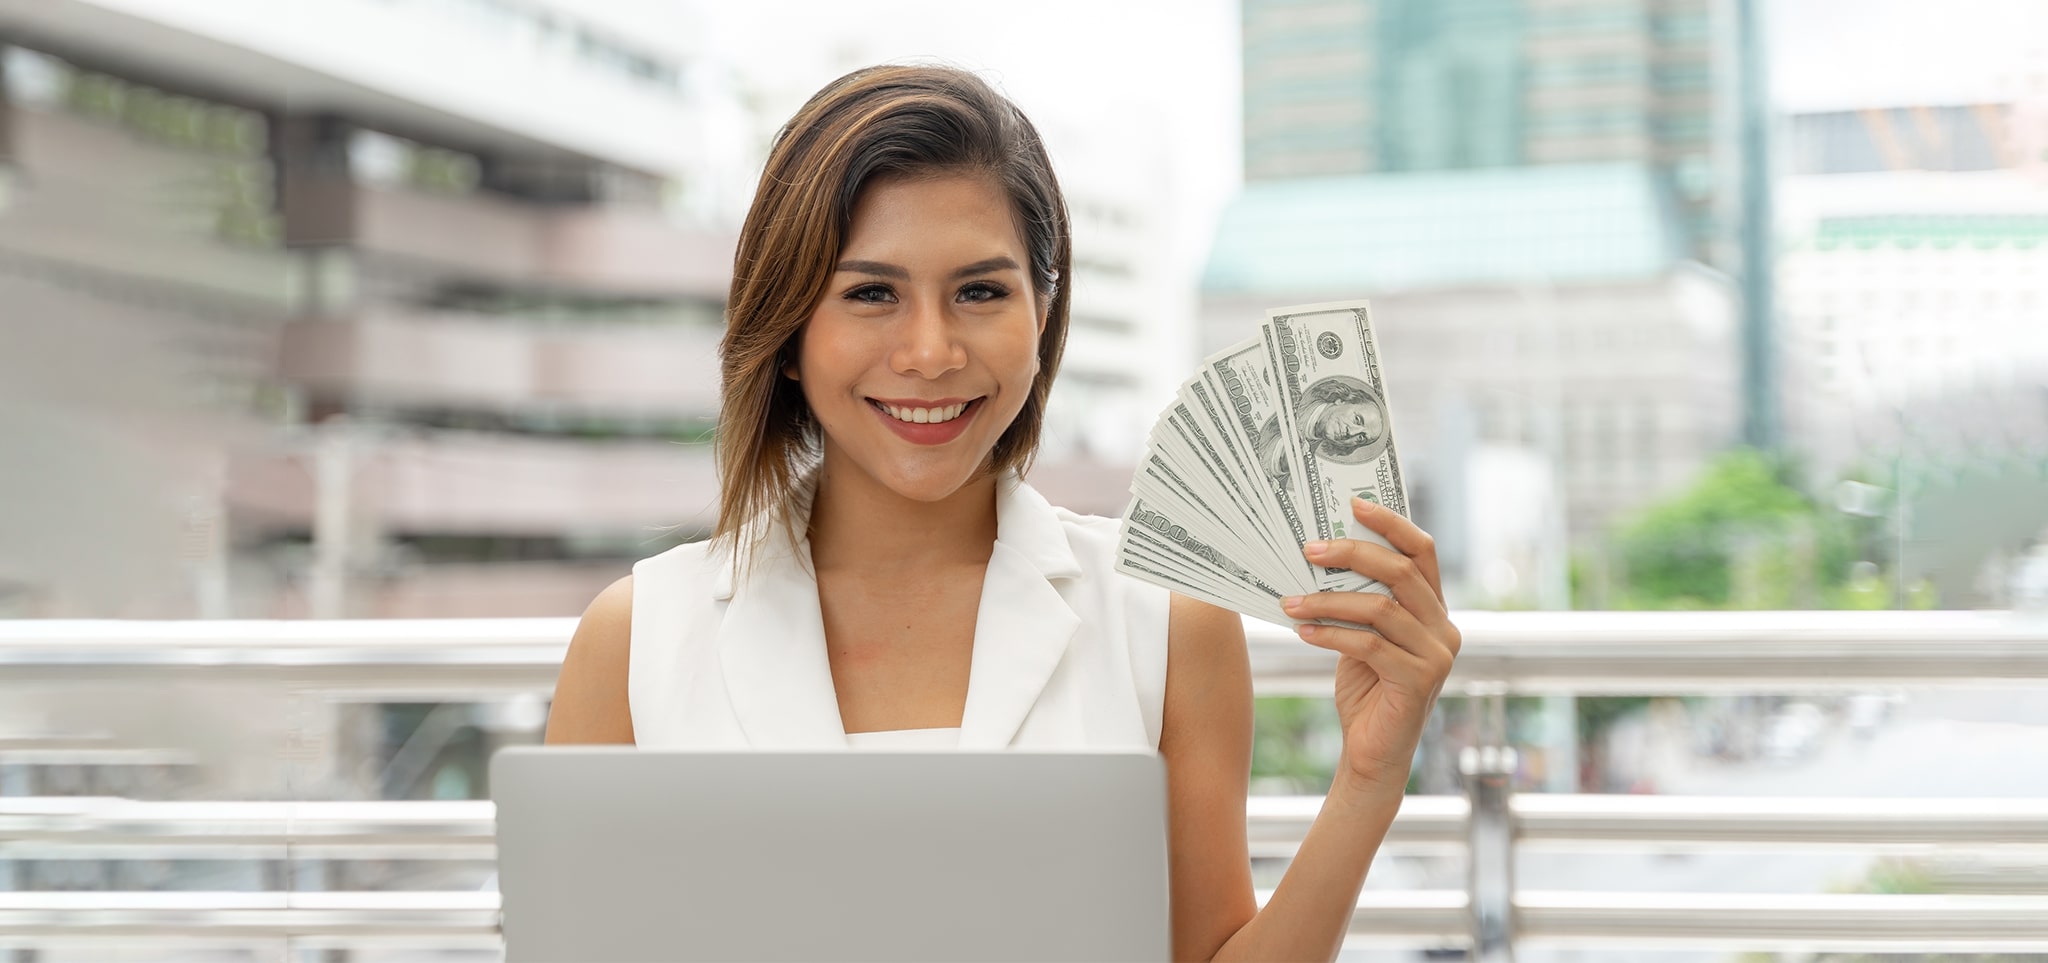 How to Get a Quick $500 Cash Advance with No Credit Check